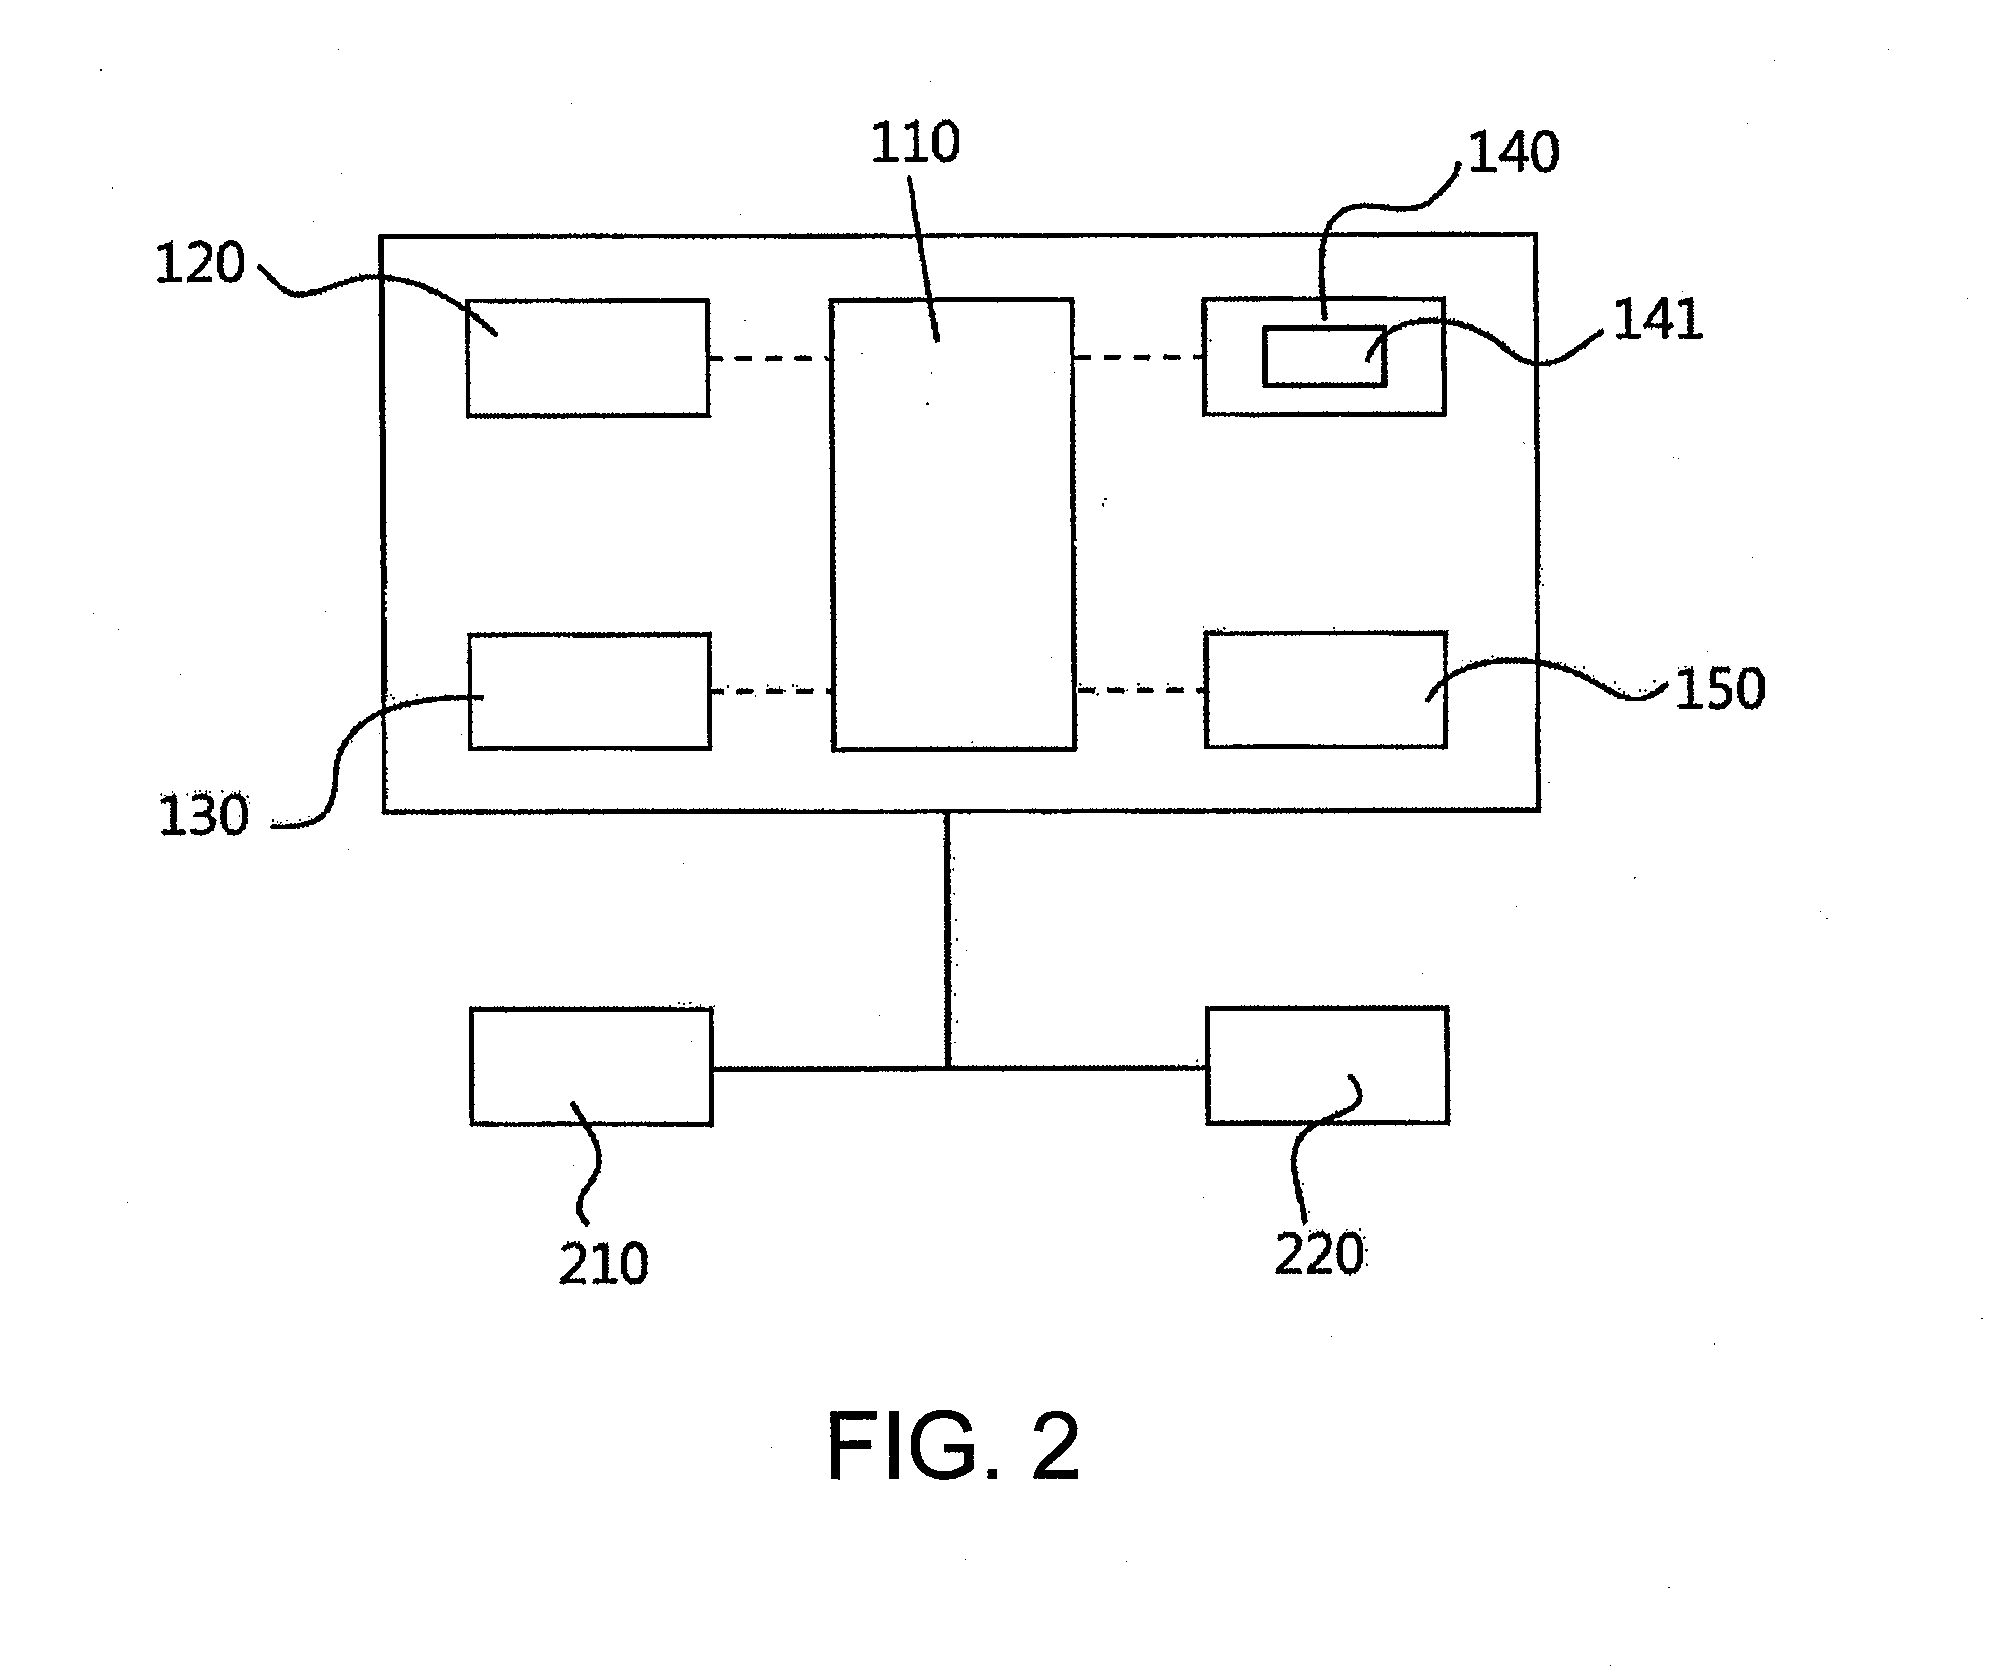 Method and system for providing a face adjustment image